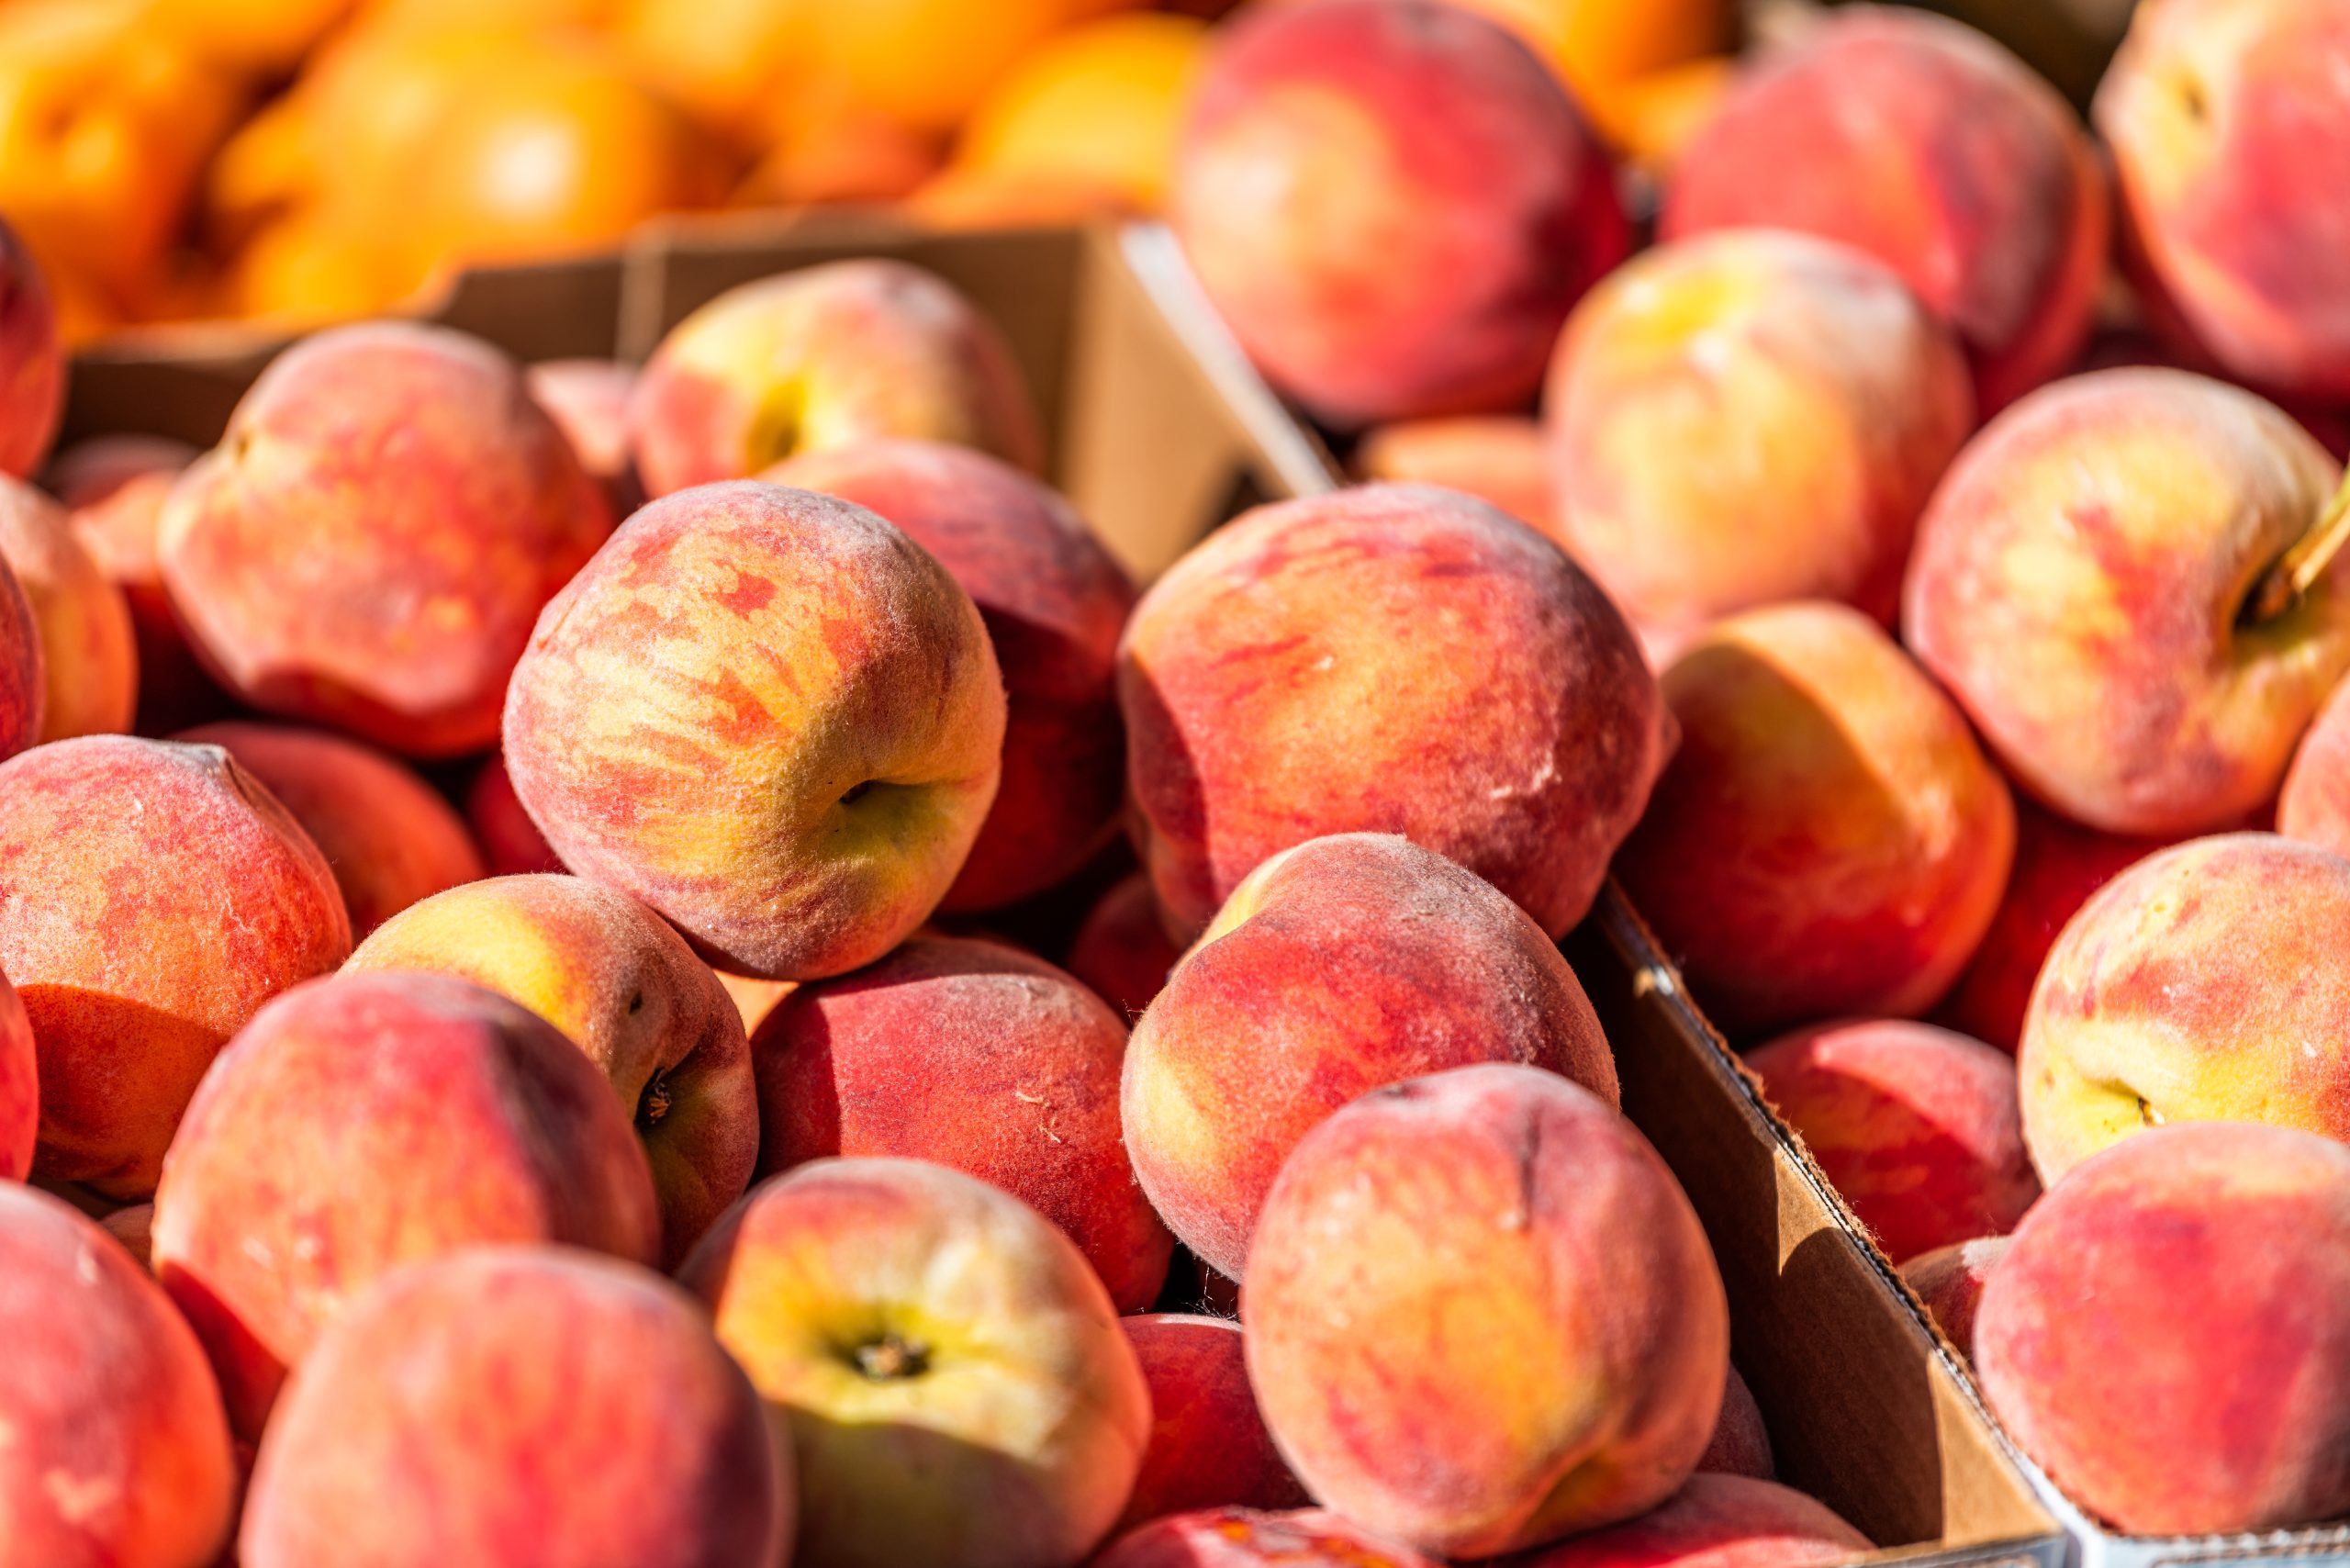 How to Pick the Best Peaches